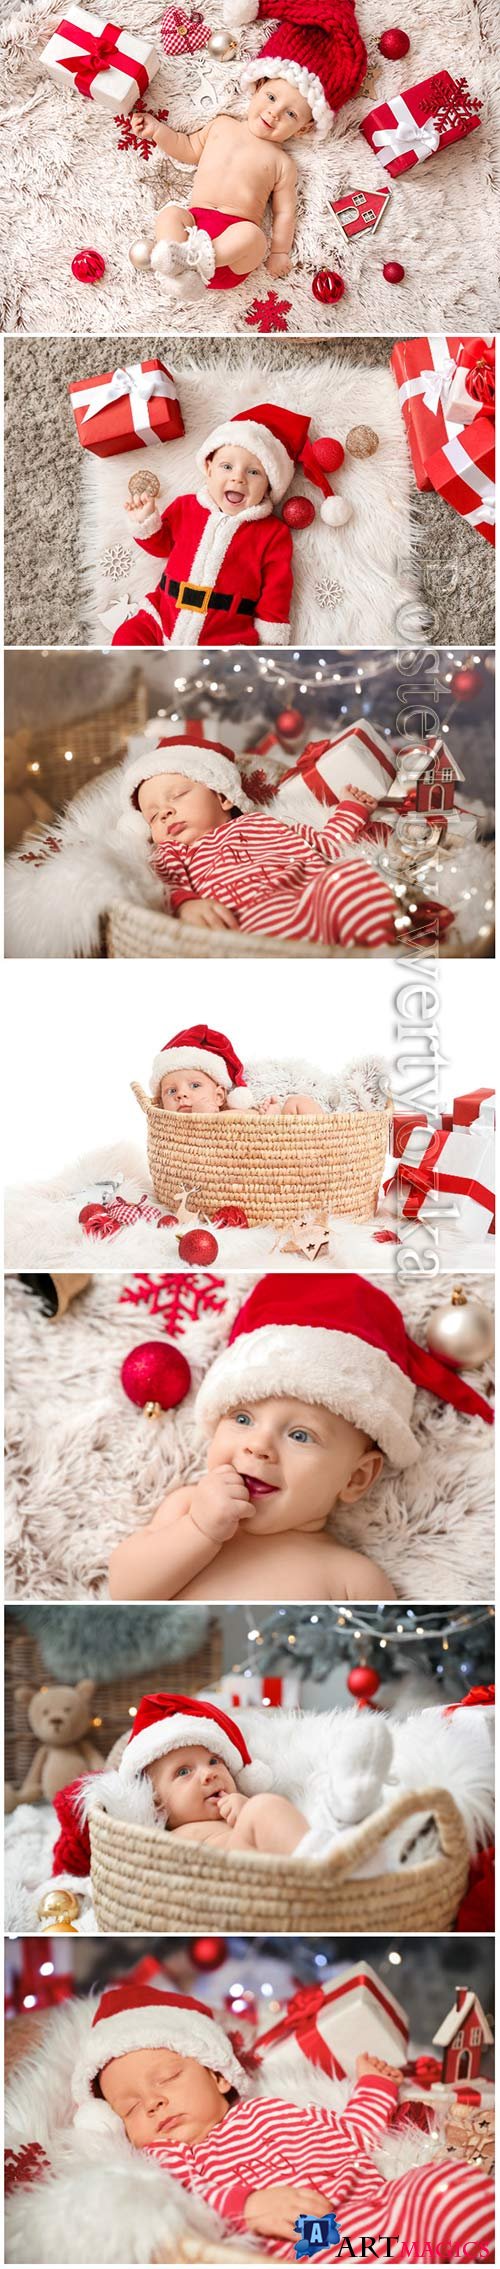 Cute little baby in Santa Claus hat and with Christmas gifts lying on plaid